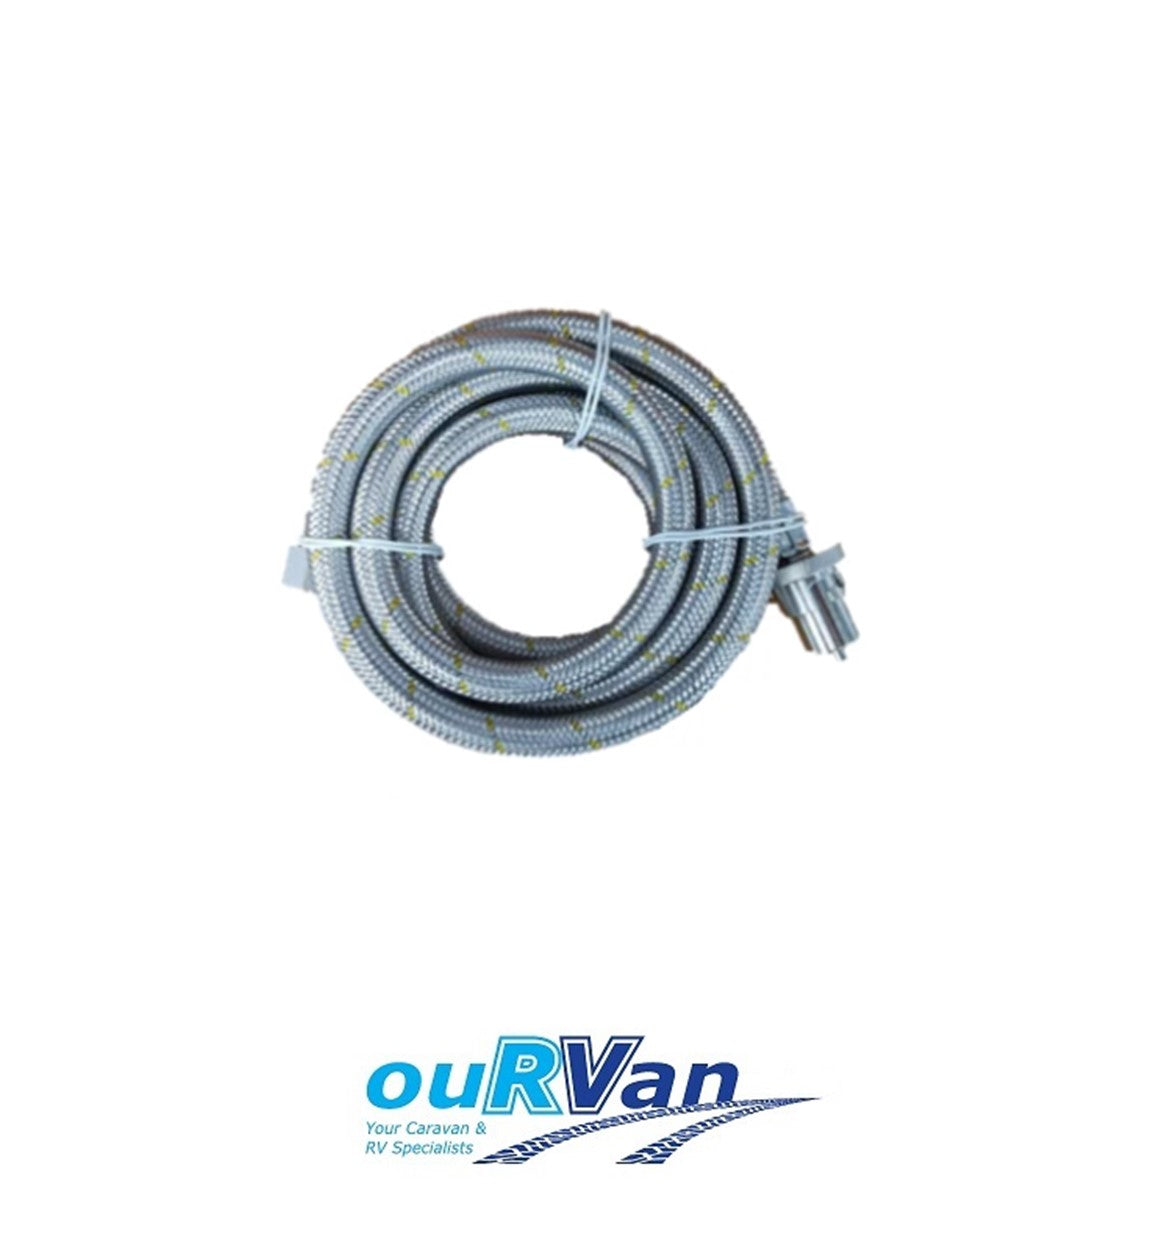 Gas Bayonet Hose To Suit Weber Q And Baby Q 3 Meter Braided 3/8 Sae Fitting Caravan